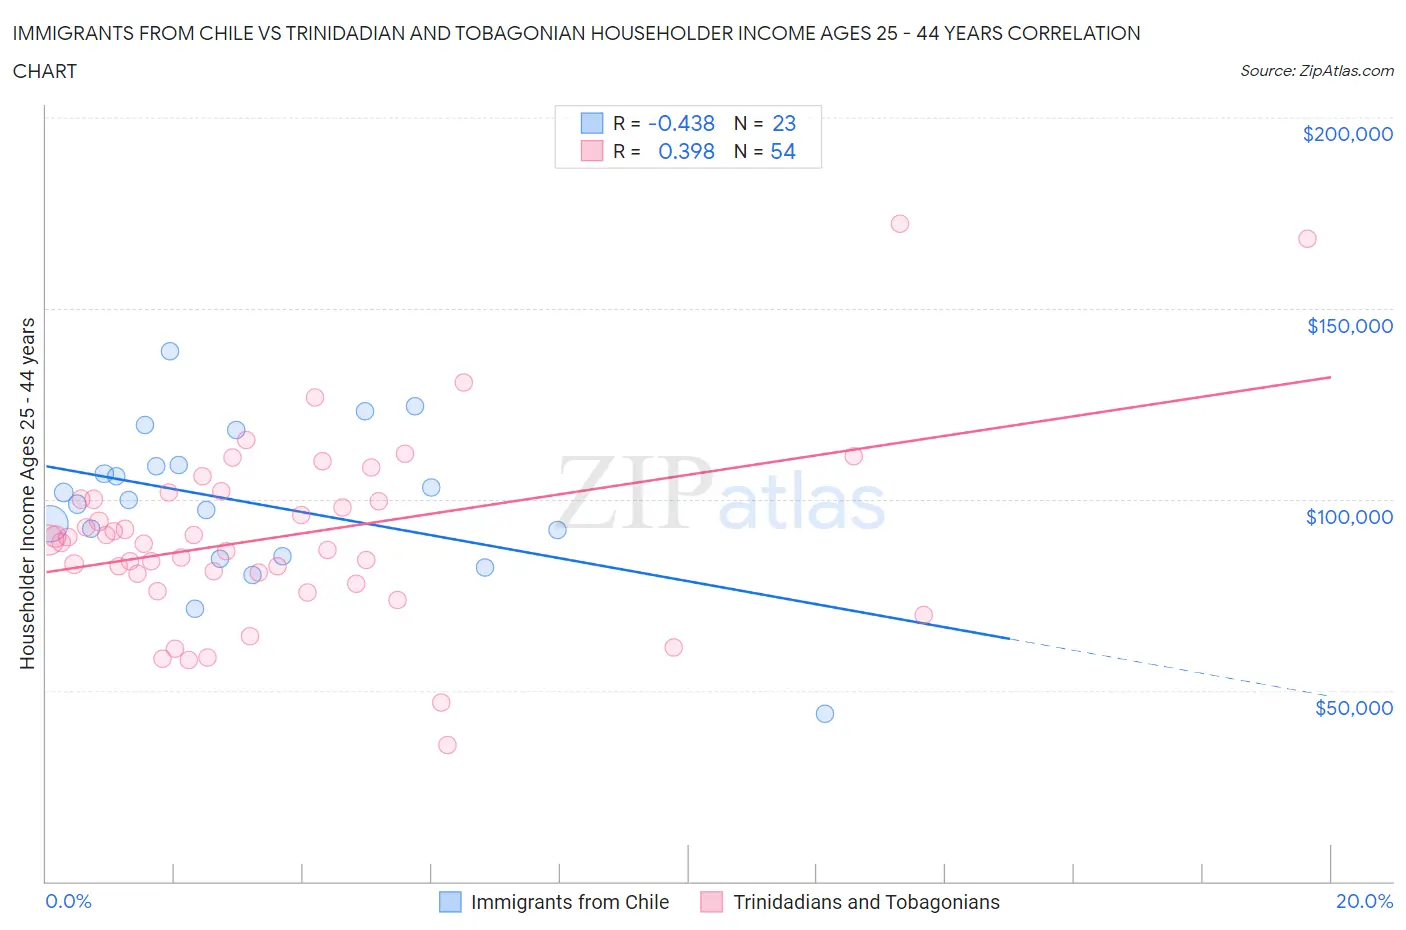 Immigrants from Chile vs Trinidadian and Tobagonian Householder Income Ages 25 - 44 years